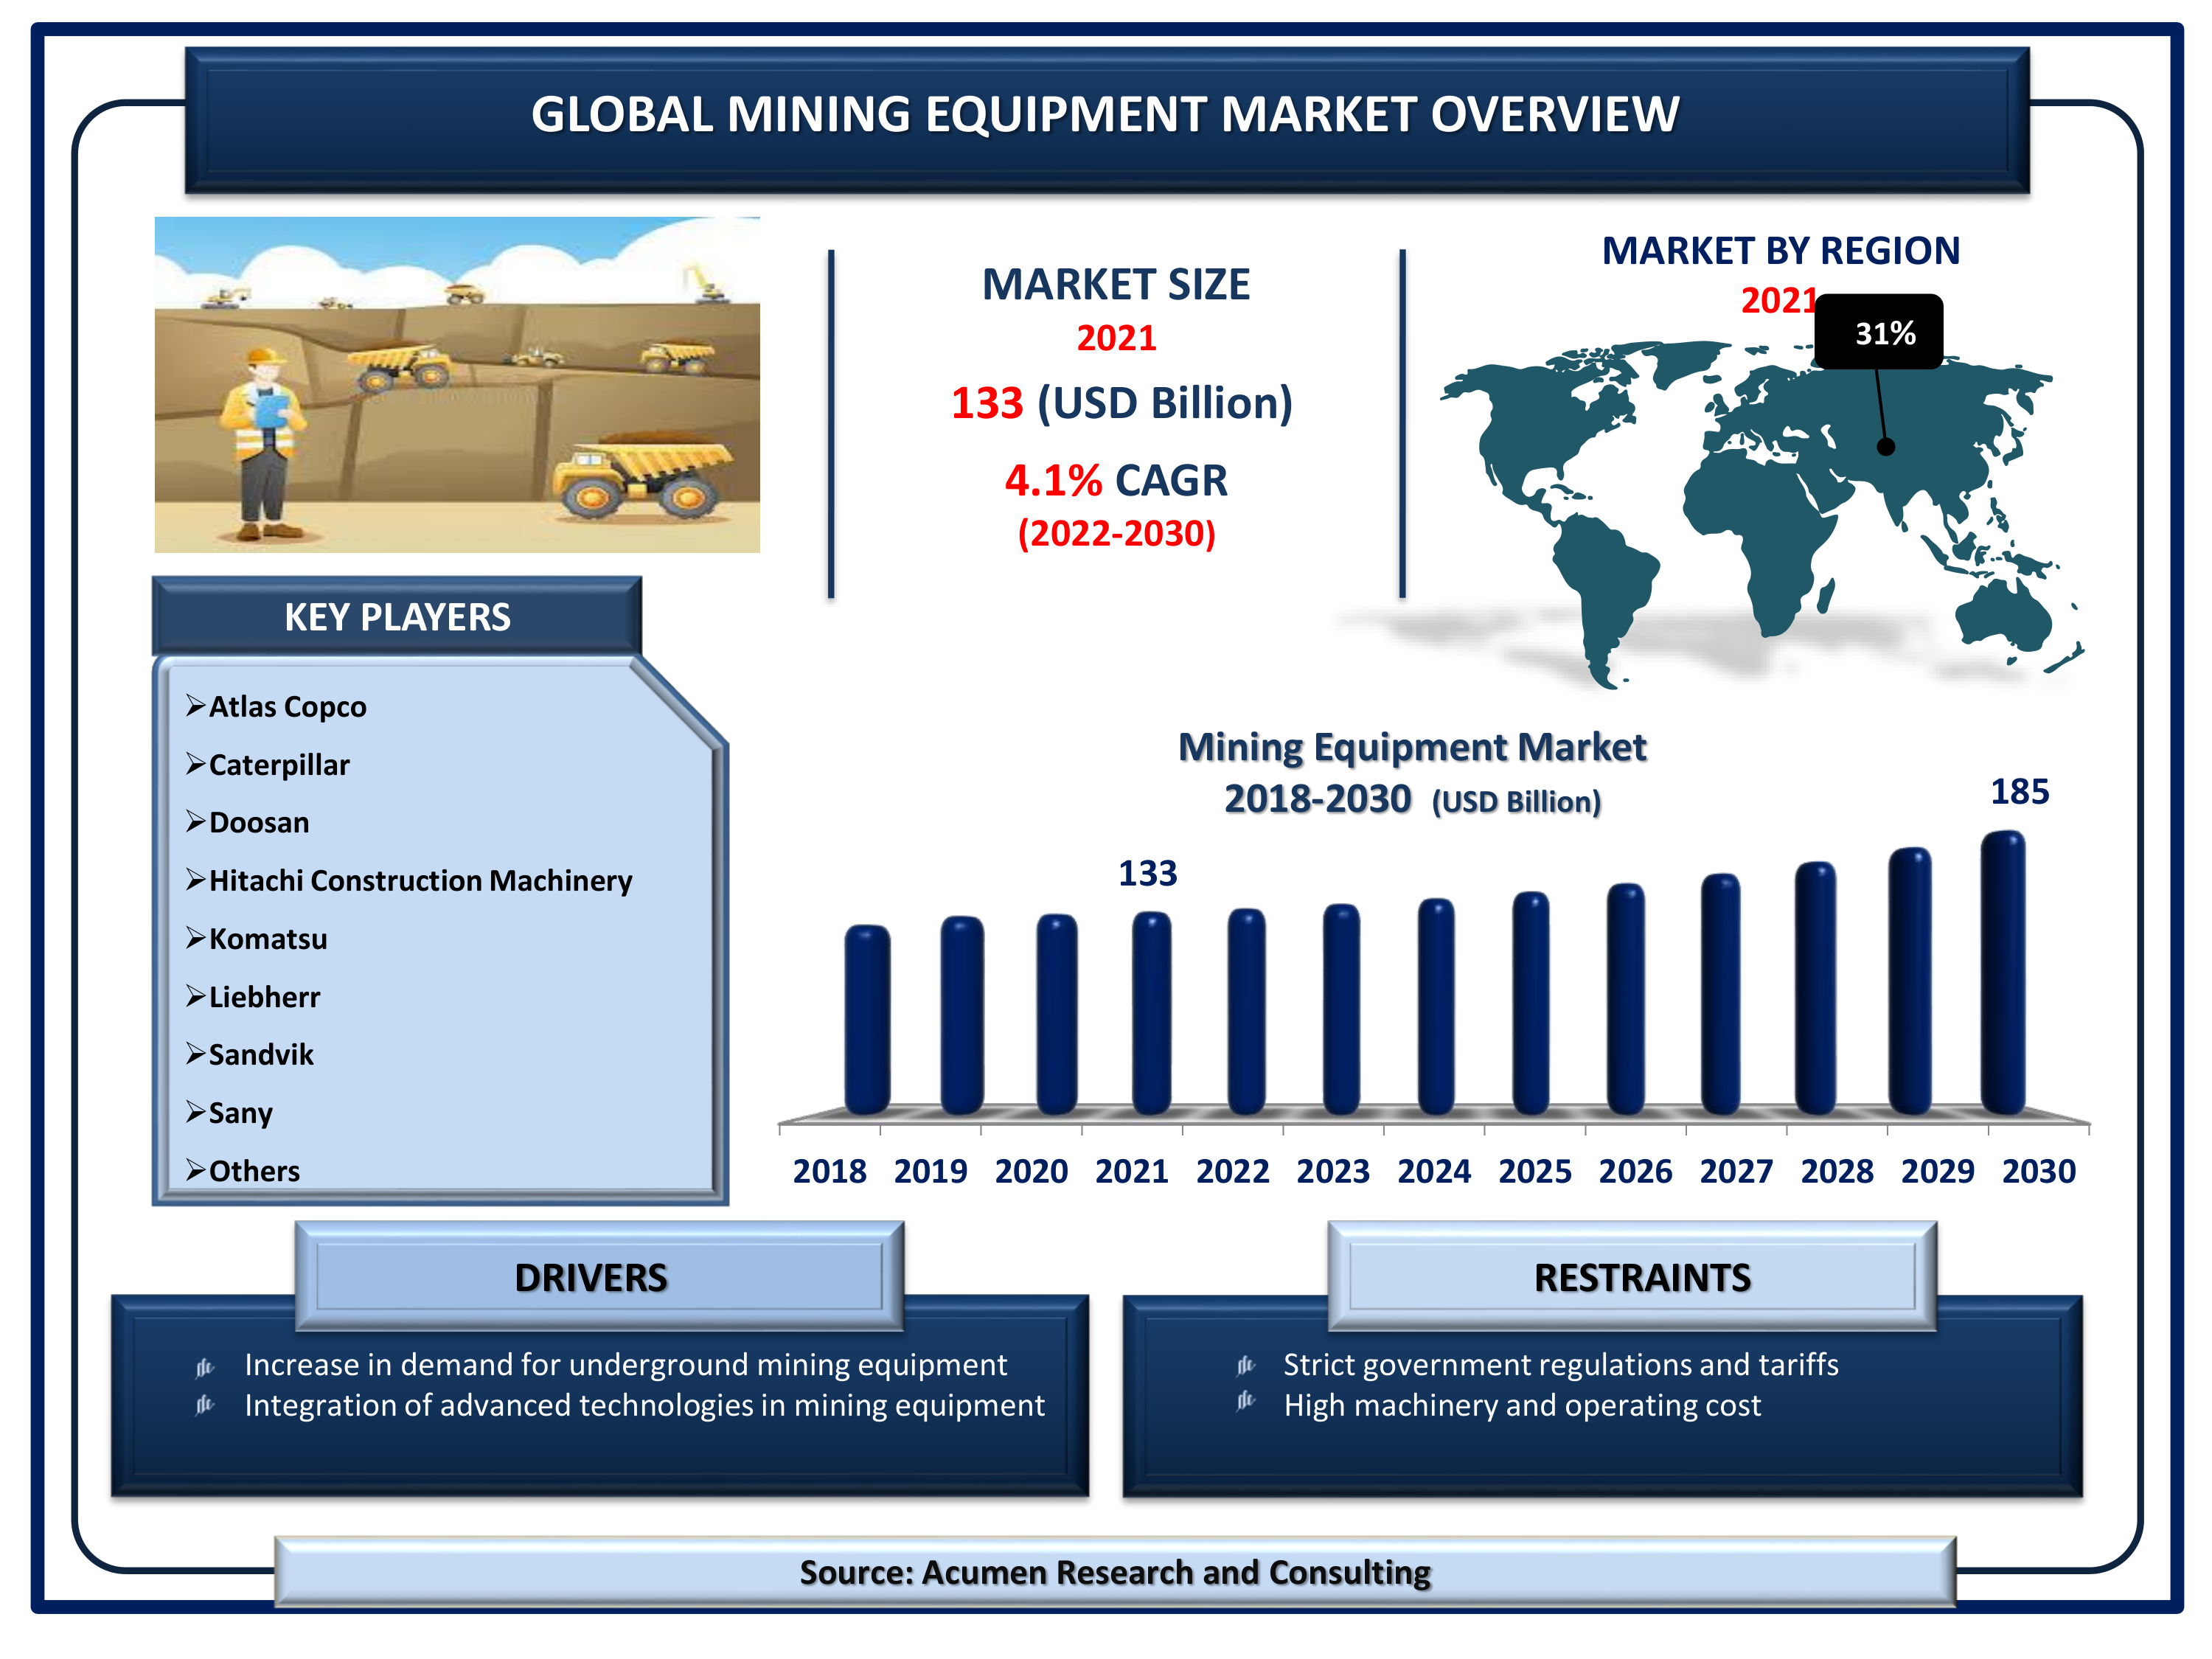 The Global Mining Equipment Market Size is valued at USD 133 billion in 2021 and is estimated to achieve a market size of USD 185 billion by 2030; growing at a CAGR of 4.1%.